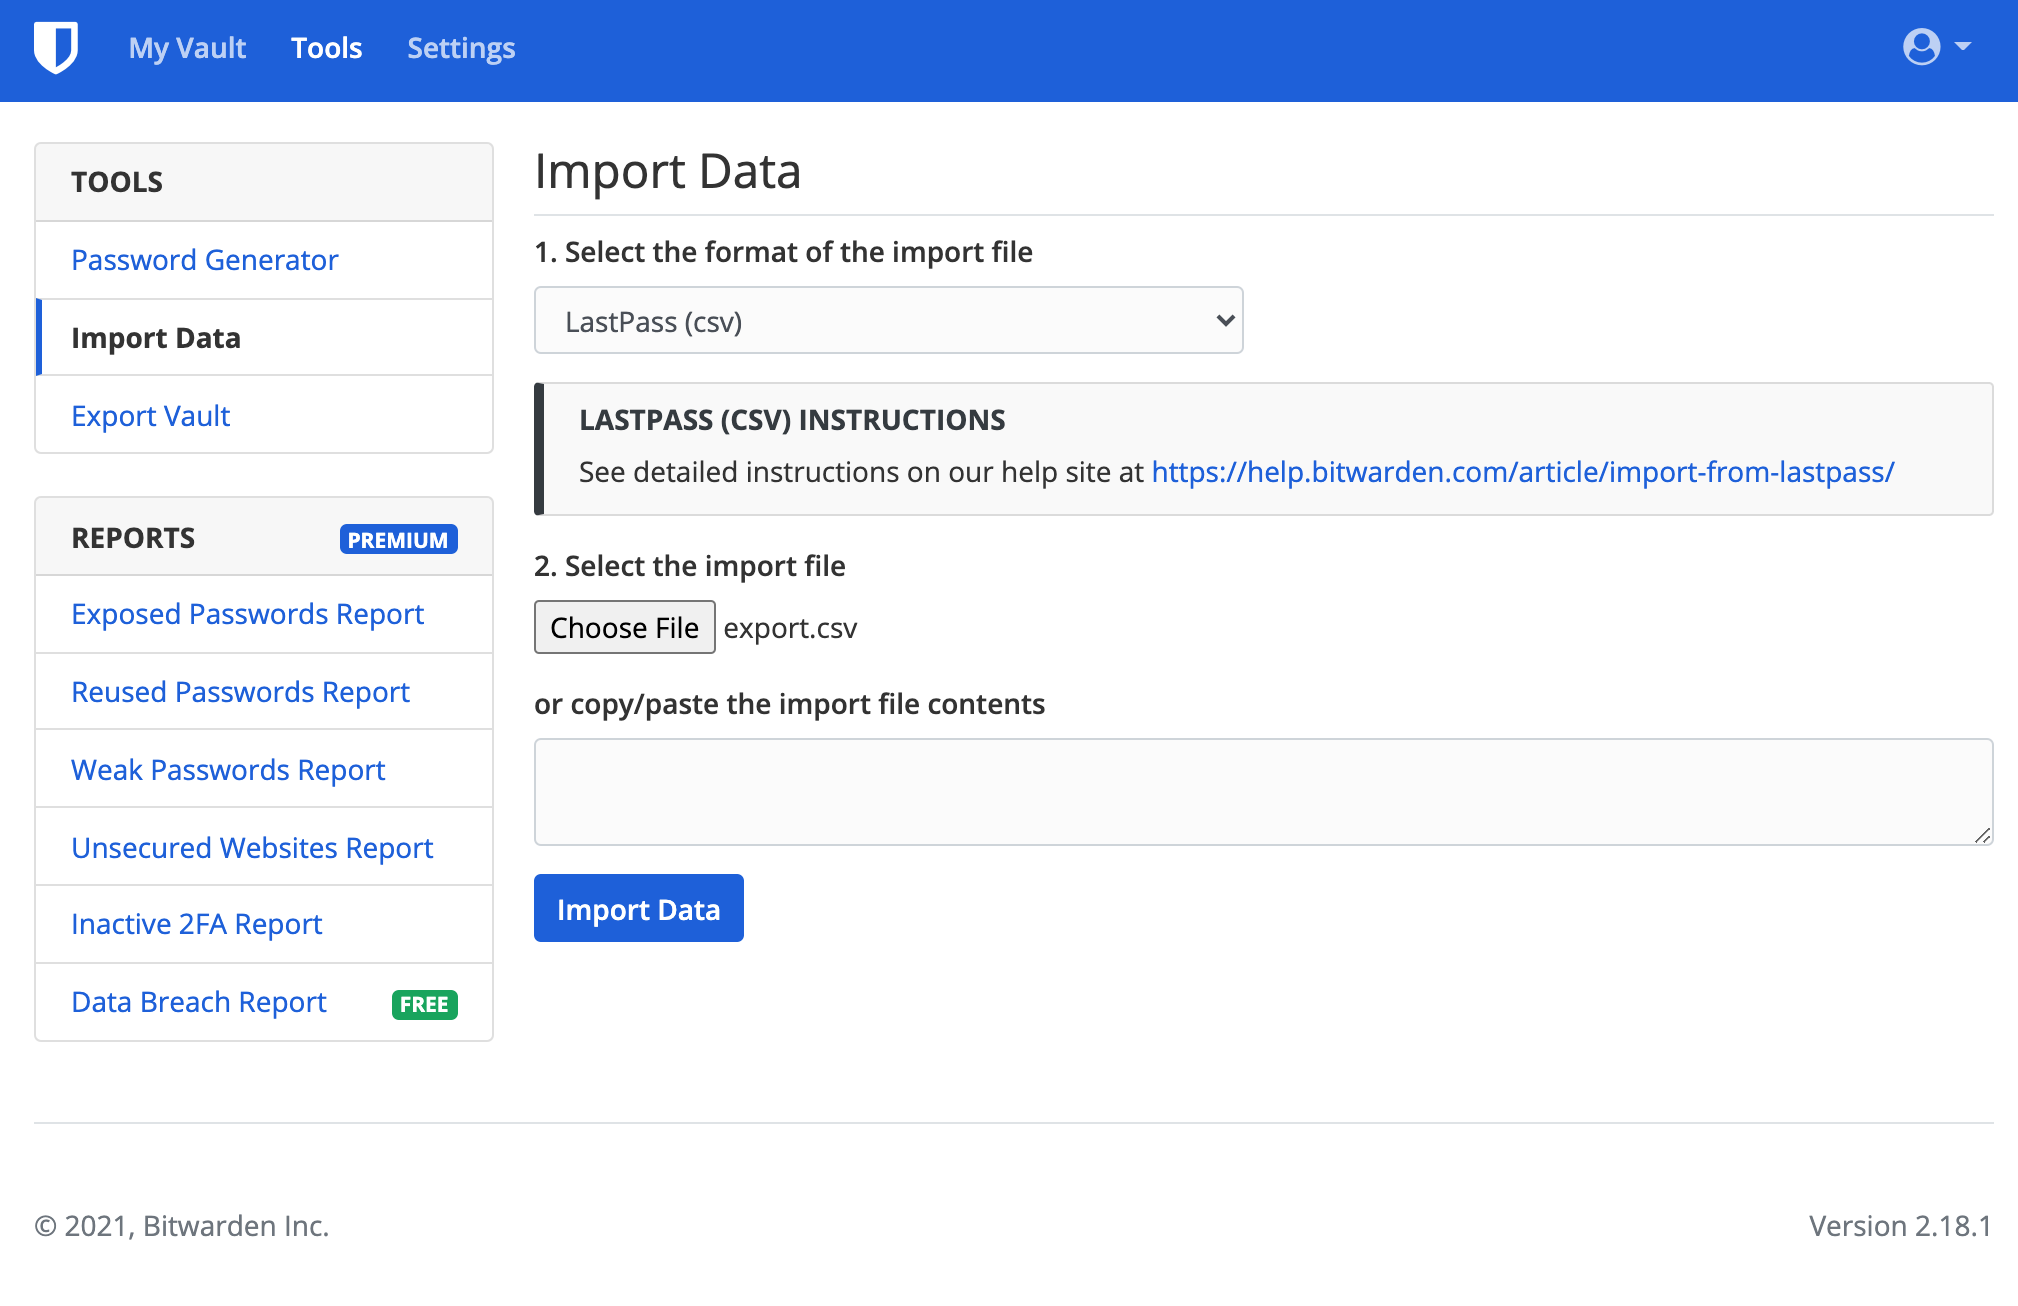 Bitwarden interface showing the 'Tools' section open and 'Import Data' highlighted